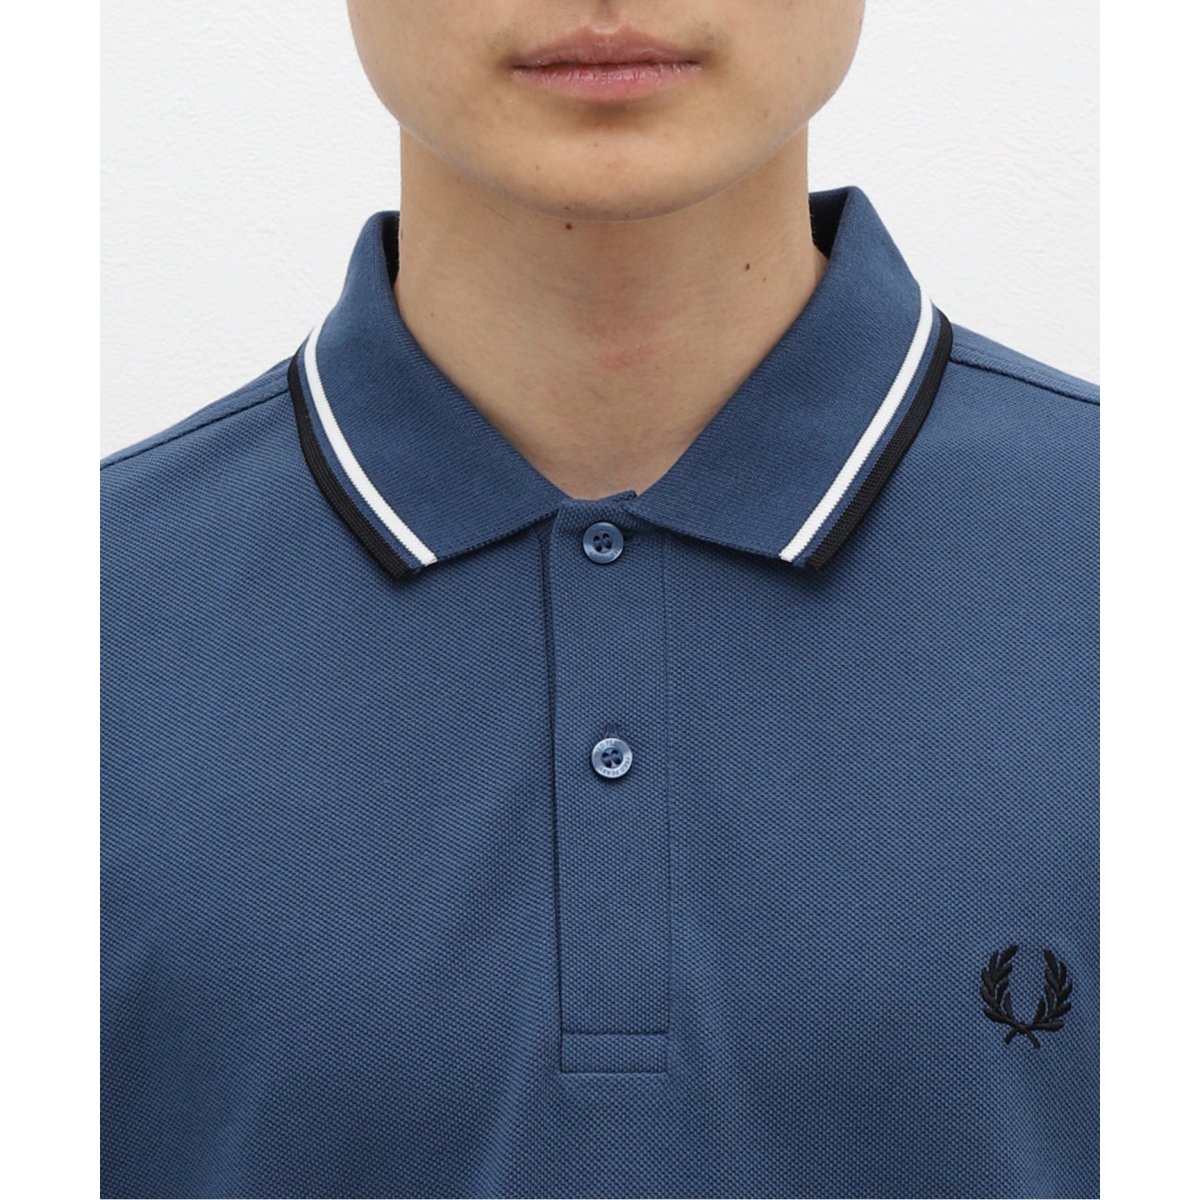 FRED PERRY / フレッドペリー】 _LS TWIN TIPPED SHIRT | 417